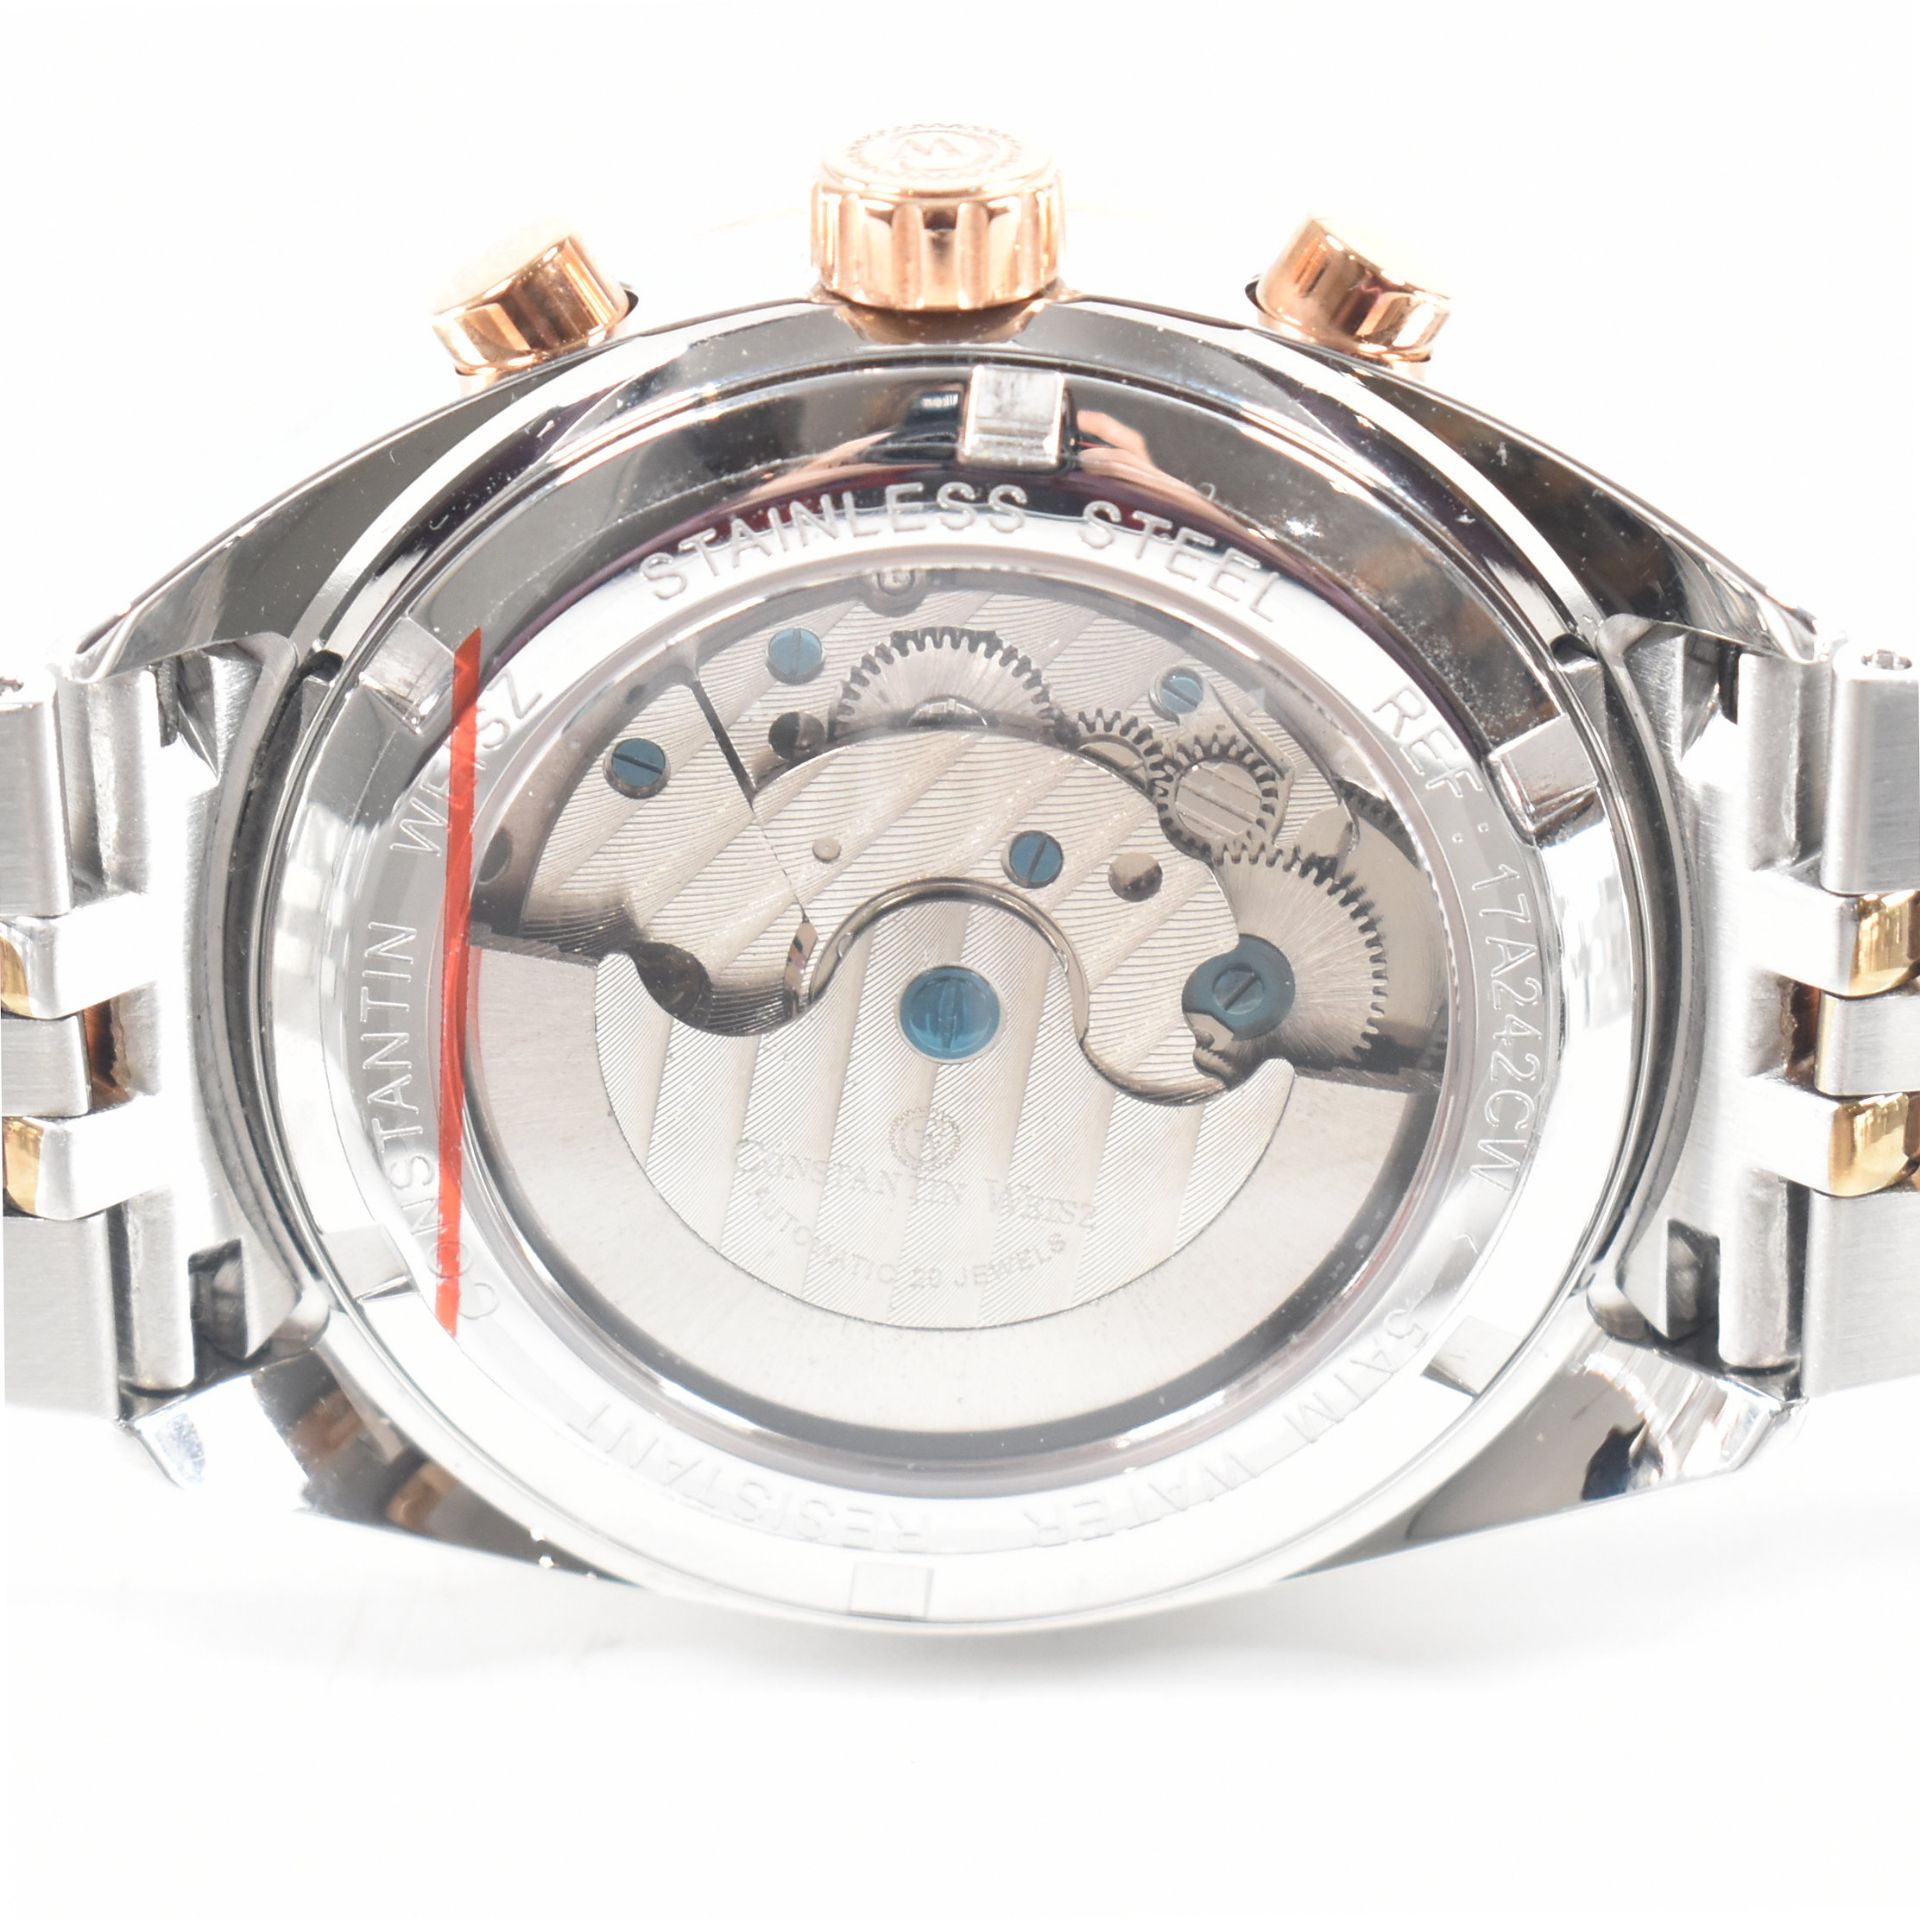 CONSTANTIN WEISZ TWO TONE STAINLESS STEEL WRIST WATCH - Image 5 of 7